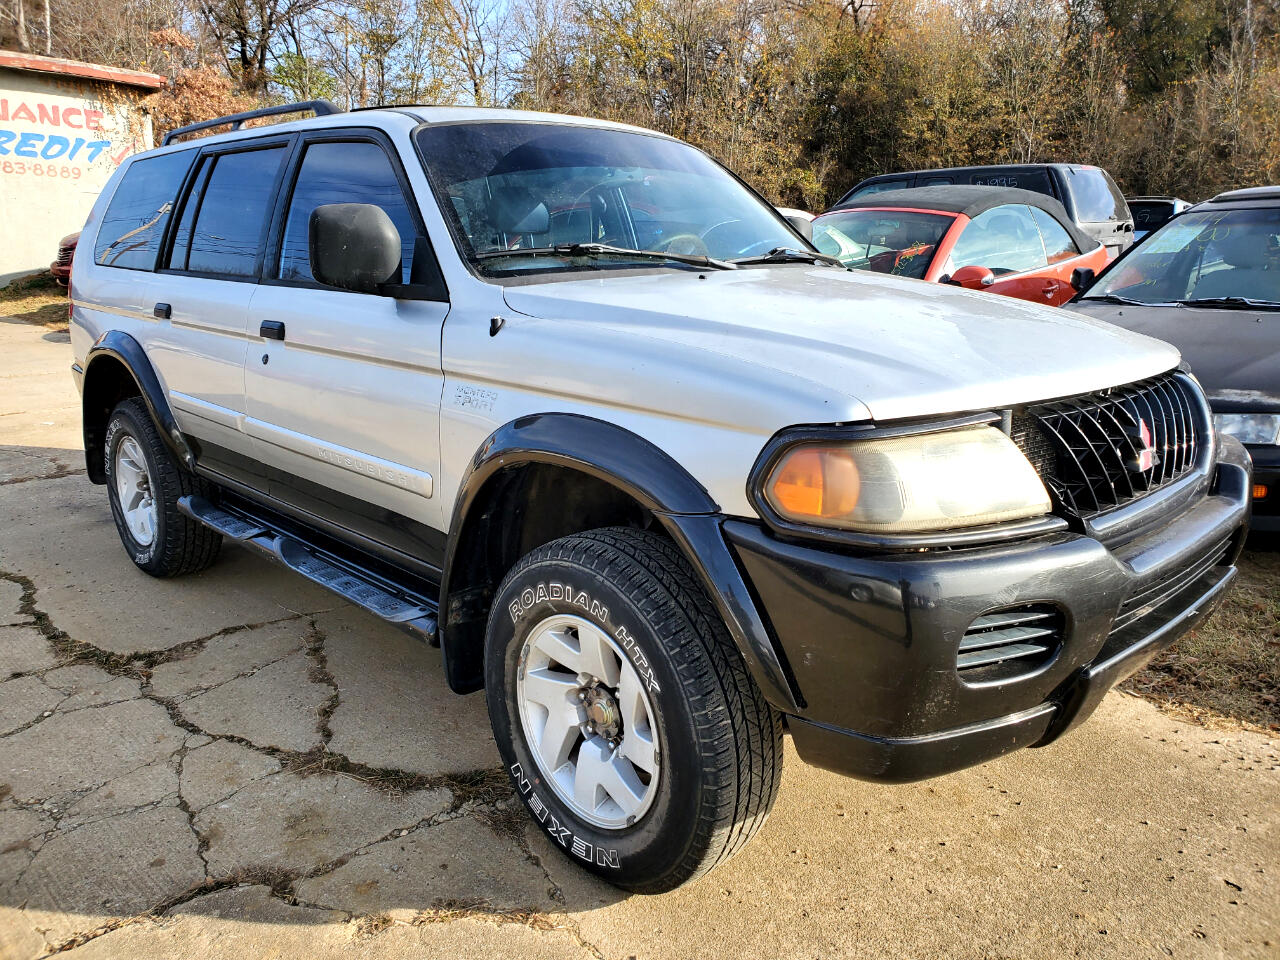 Used 2002 Mitsubishi Montero Sport 4dr XLS for Sale in Fort Smith AR 72901  Sports & Imports